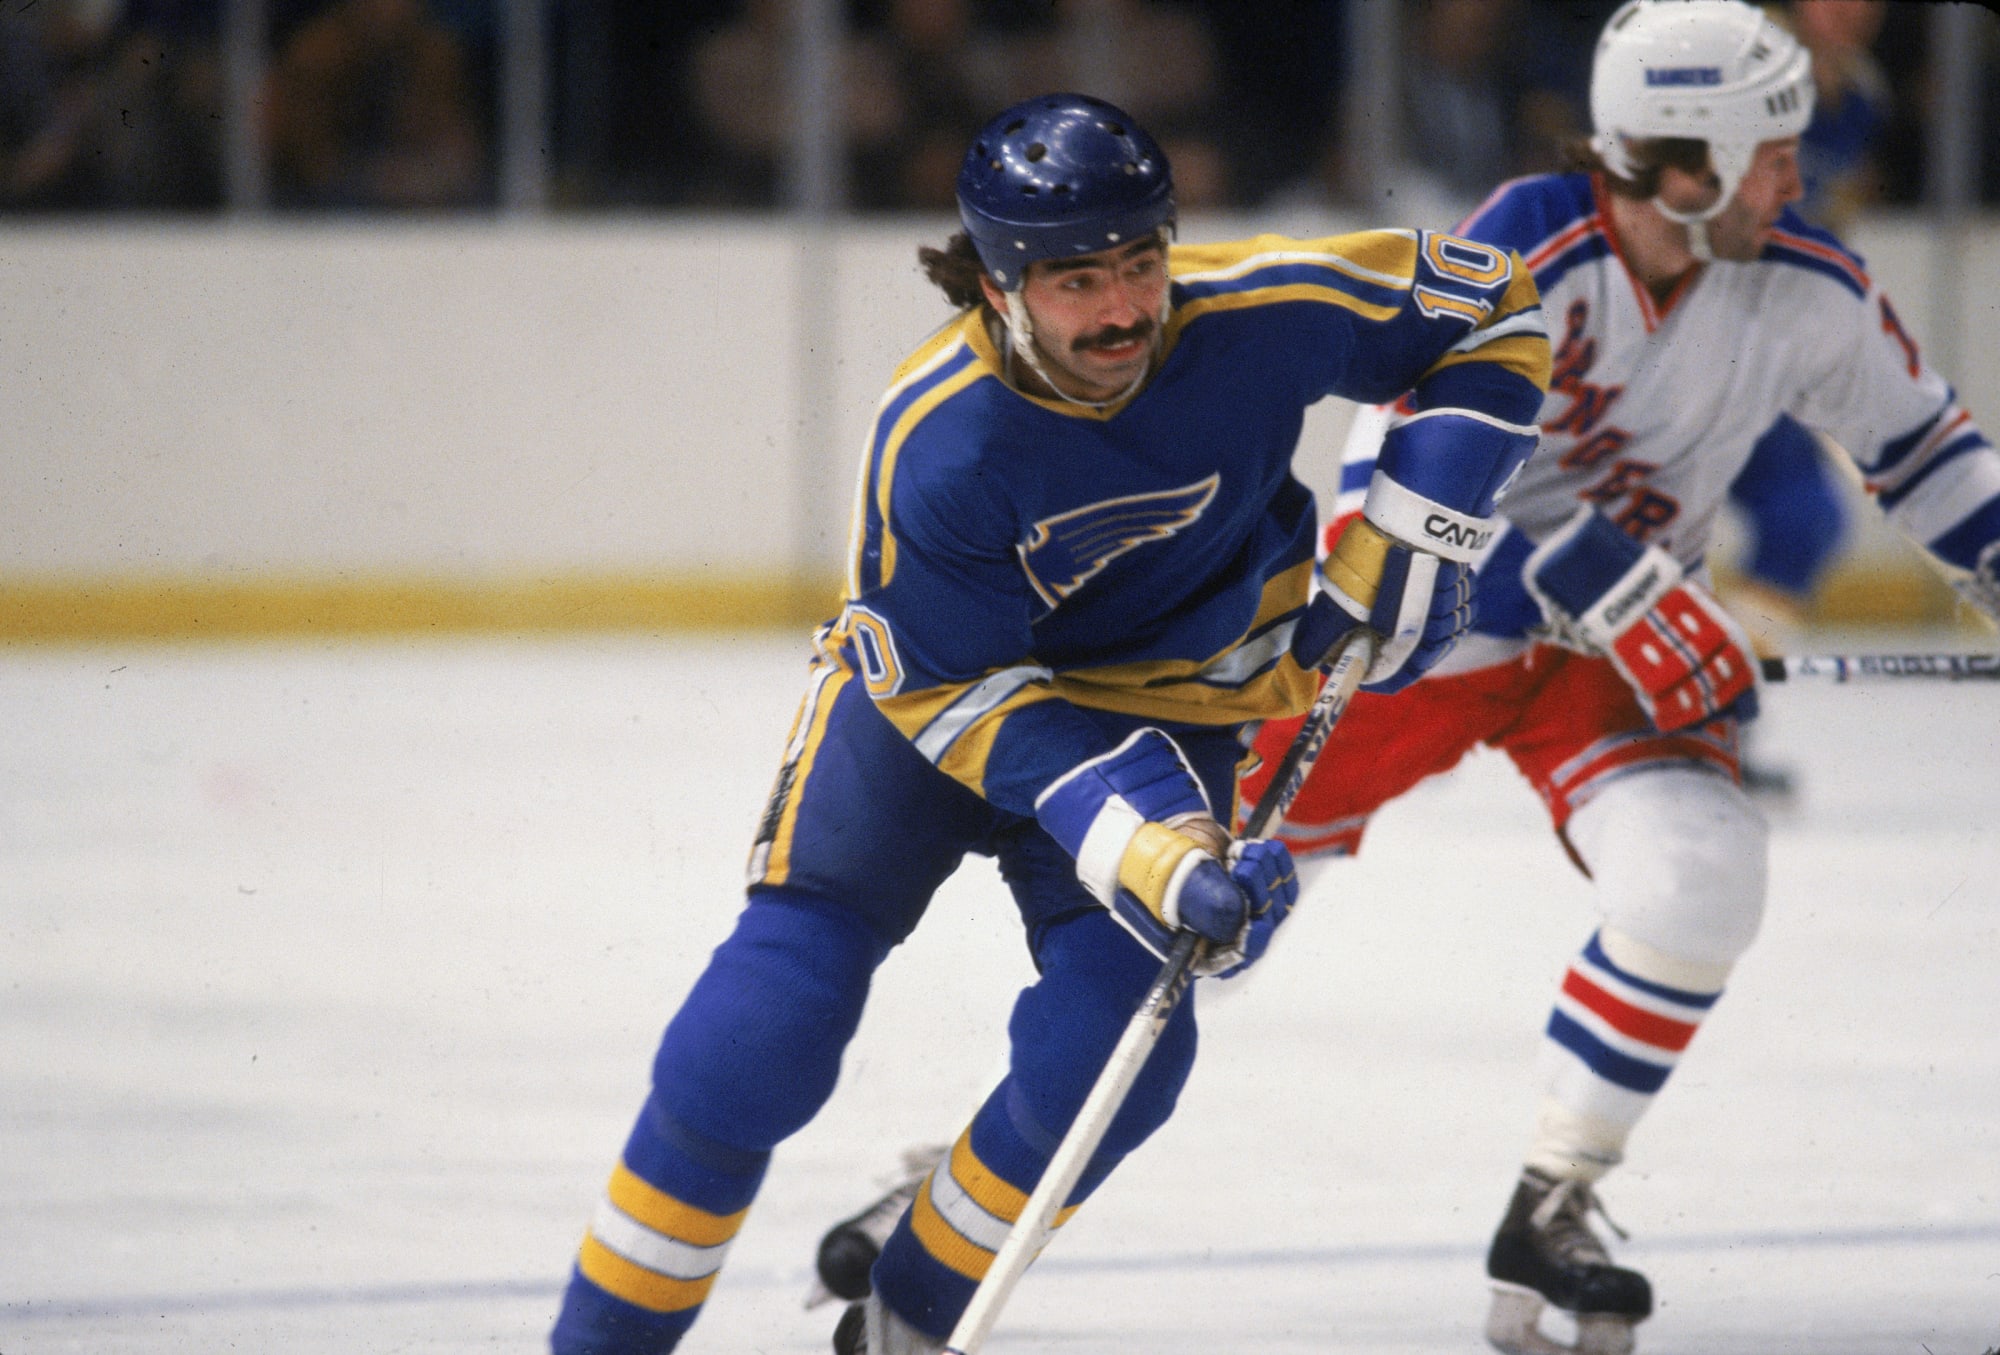 St. Louis Blues: Who Wore It Best, Jersey Number 10